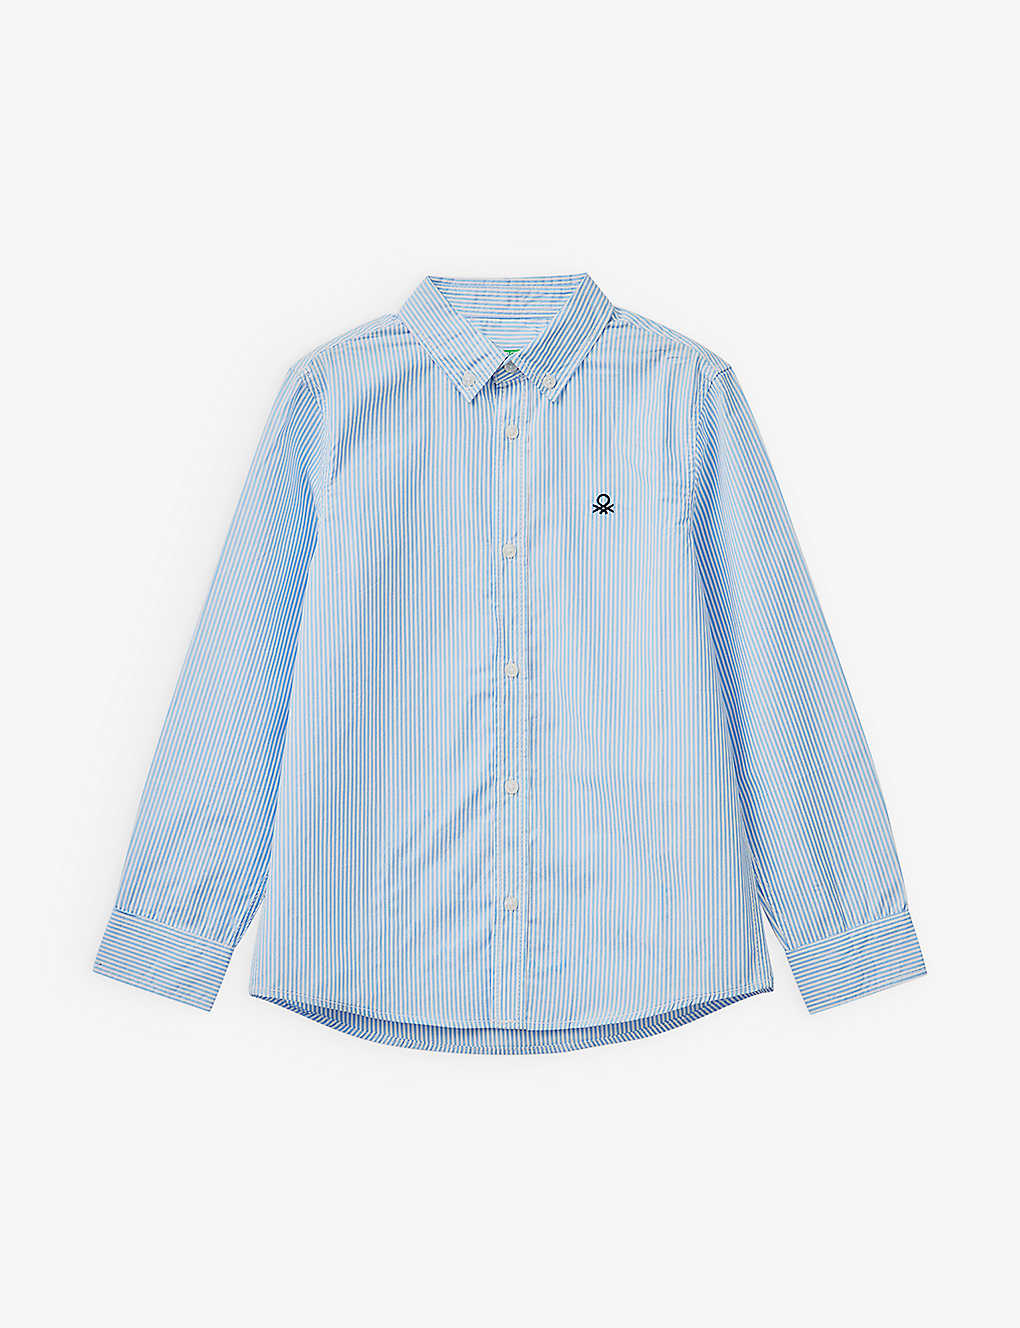 Benetton Kids' Long-sleeved Cotton Shirt 6-14 Years In Pale Blue